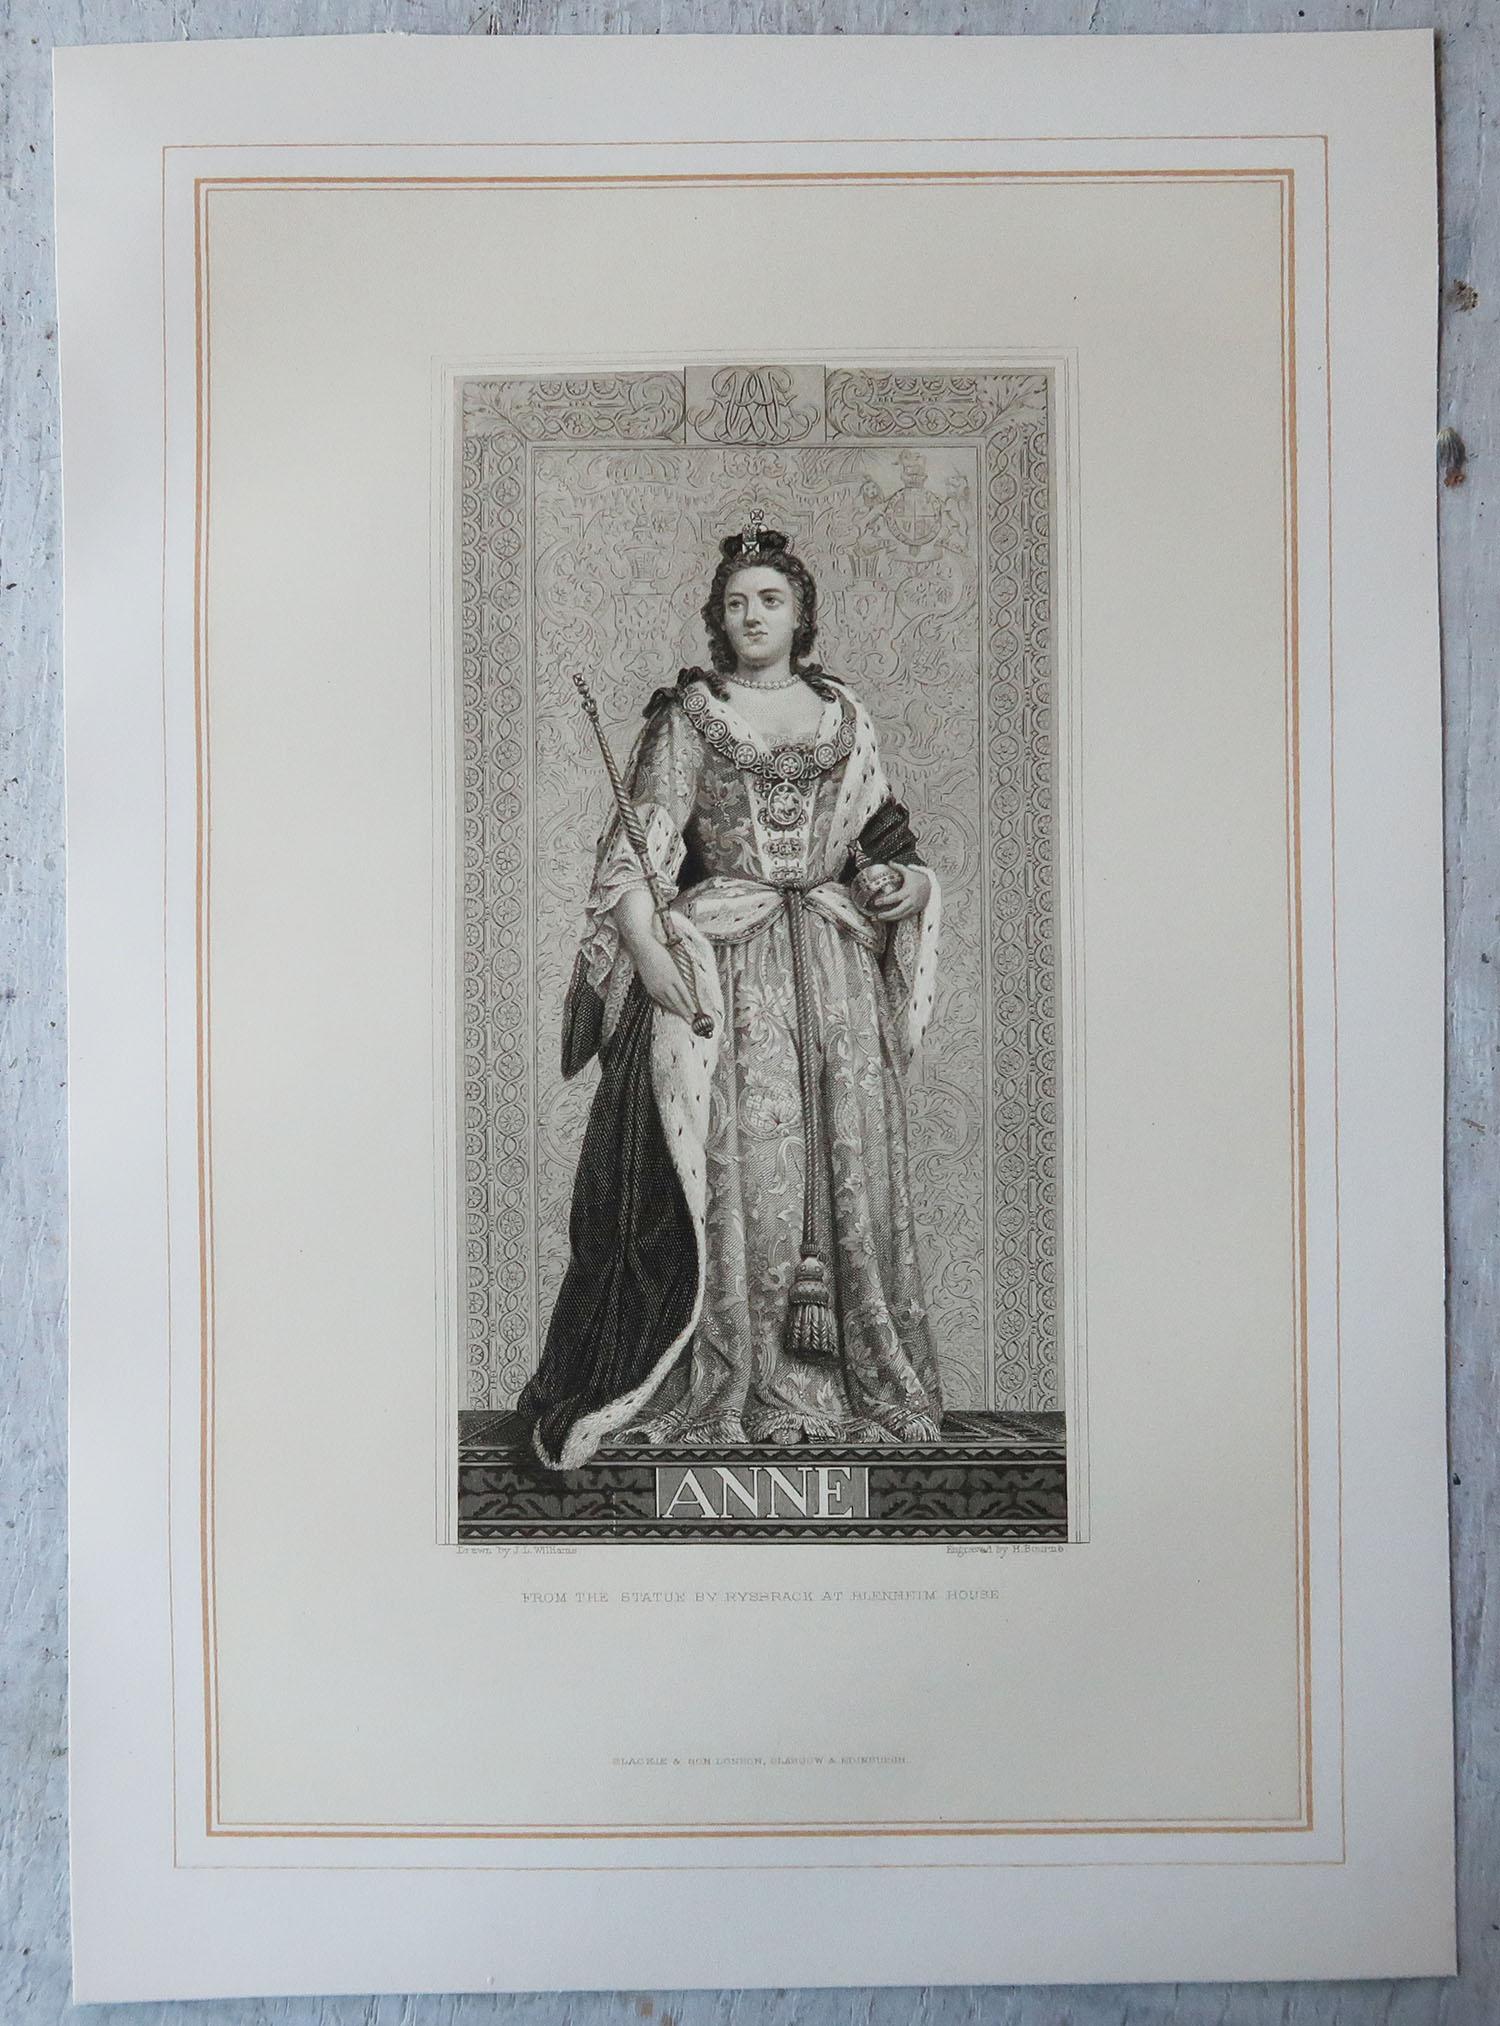 Paper Set of 12 Original Antique Prints of English Kings and Queens, C.1870